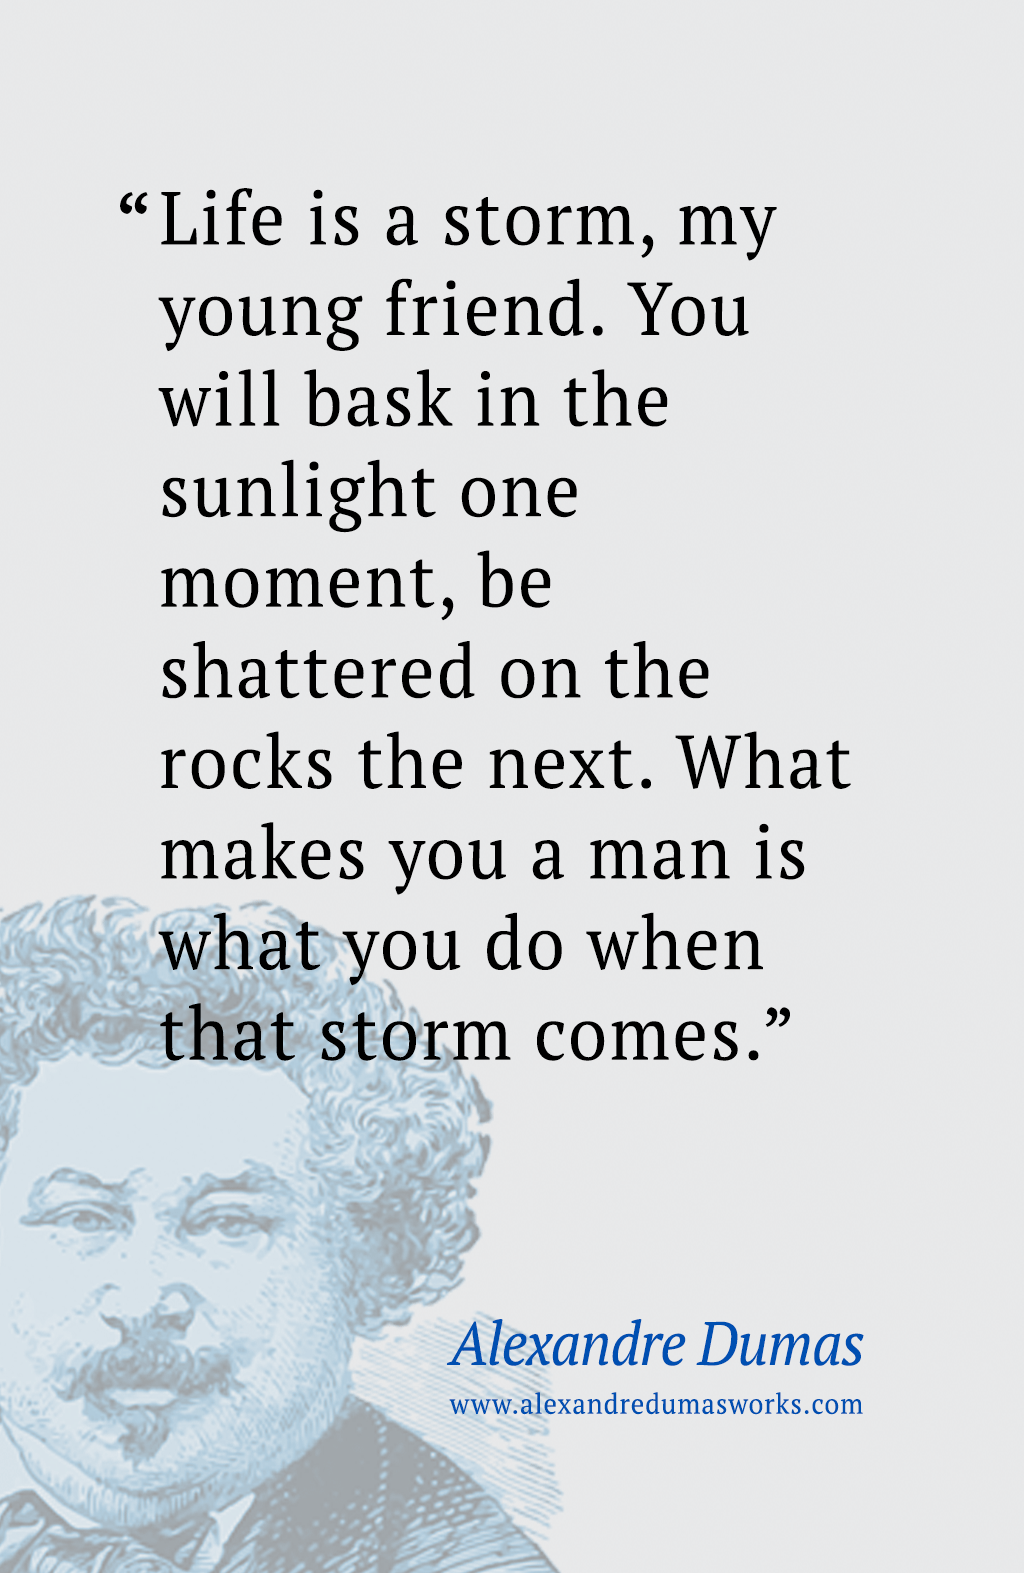 “Life is a storm, my young friend... Alexandre Dumas Quote